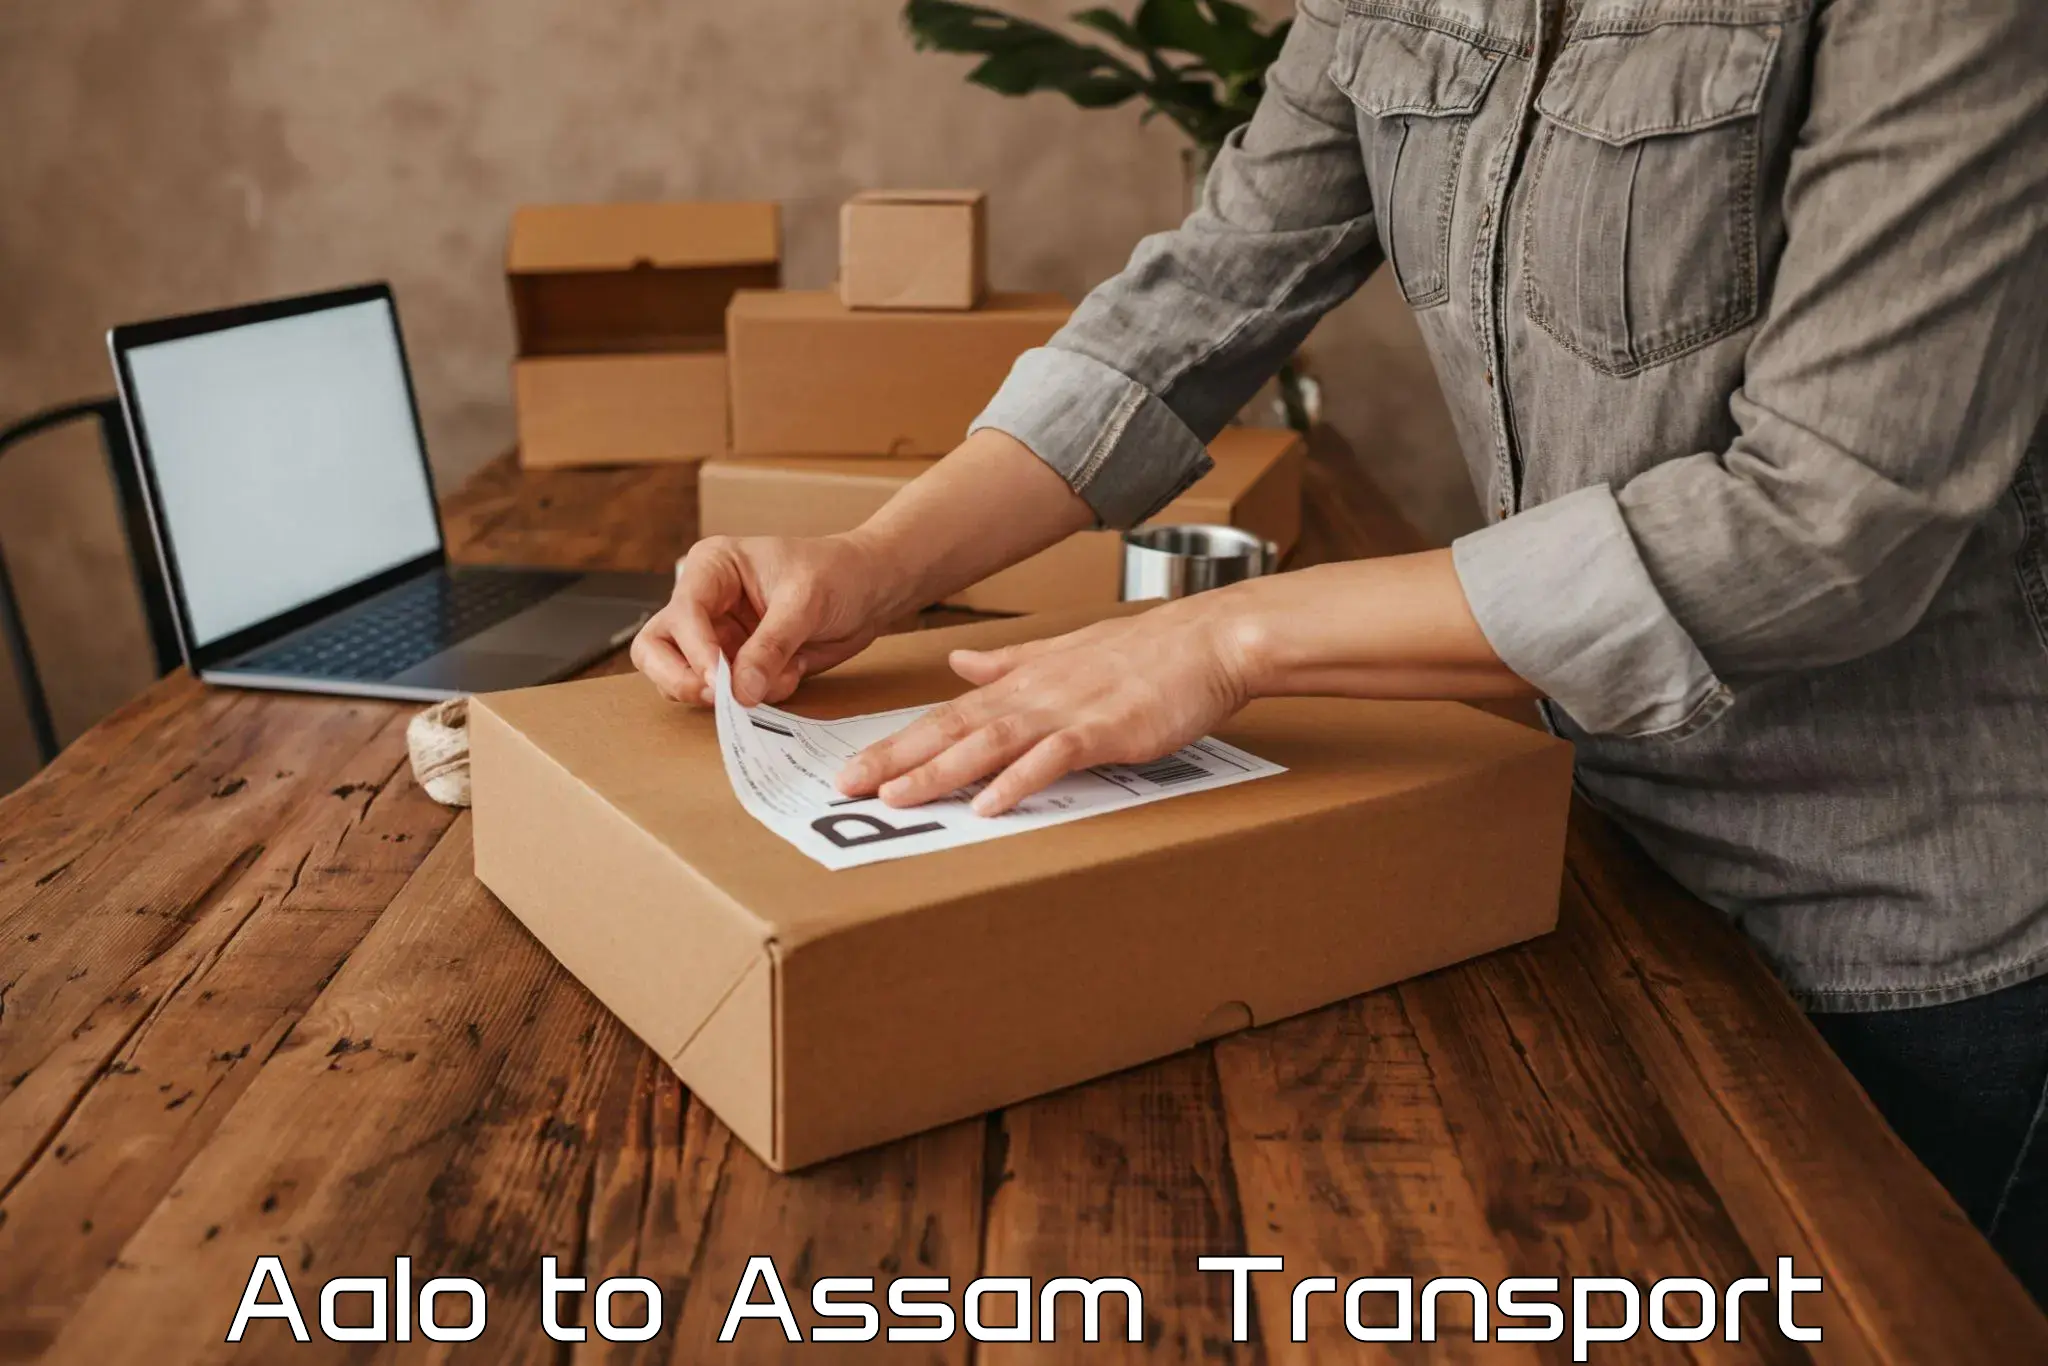 Nearby transport service Aalo to Assam